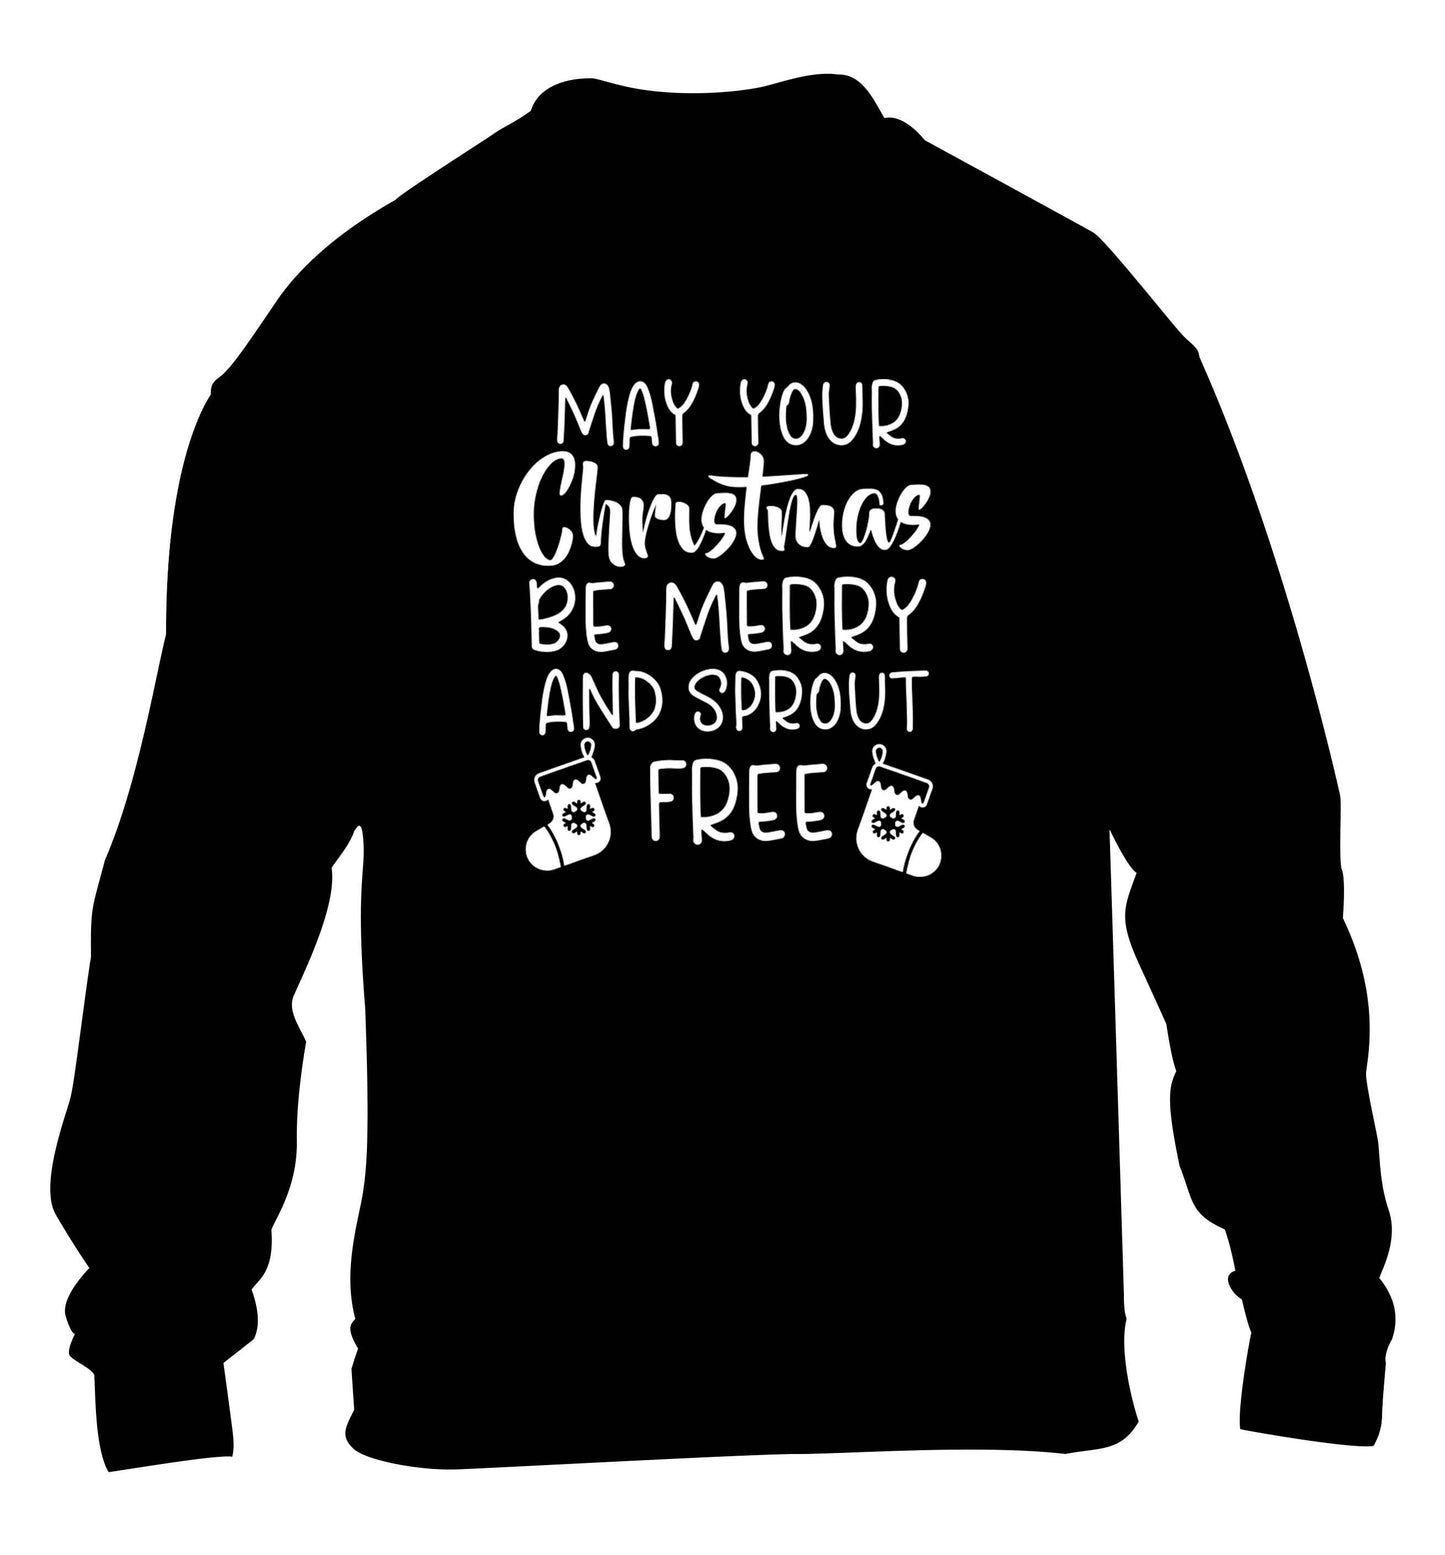 May your Christmas be merry and sprout free children's black sweater 12-13 Years